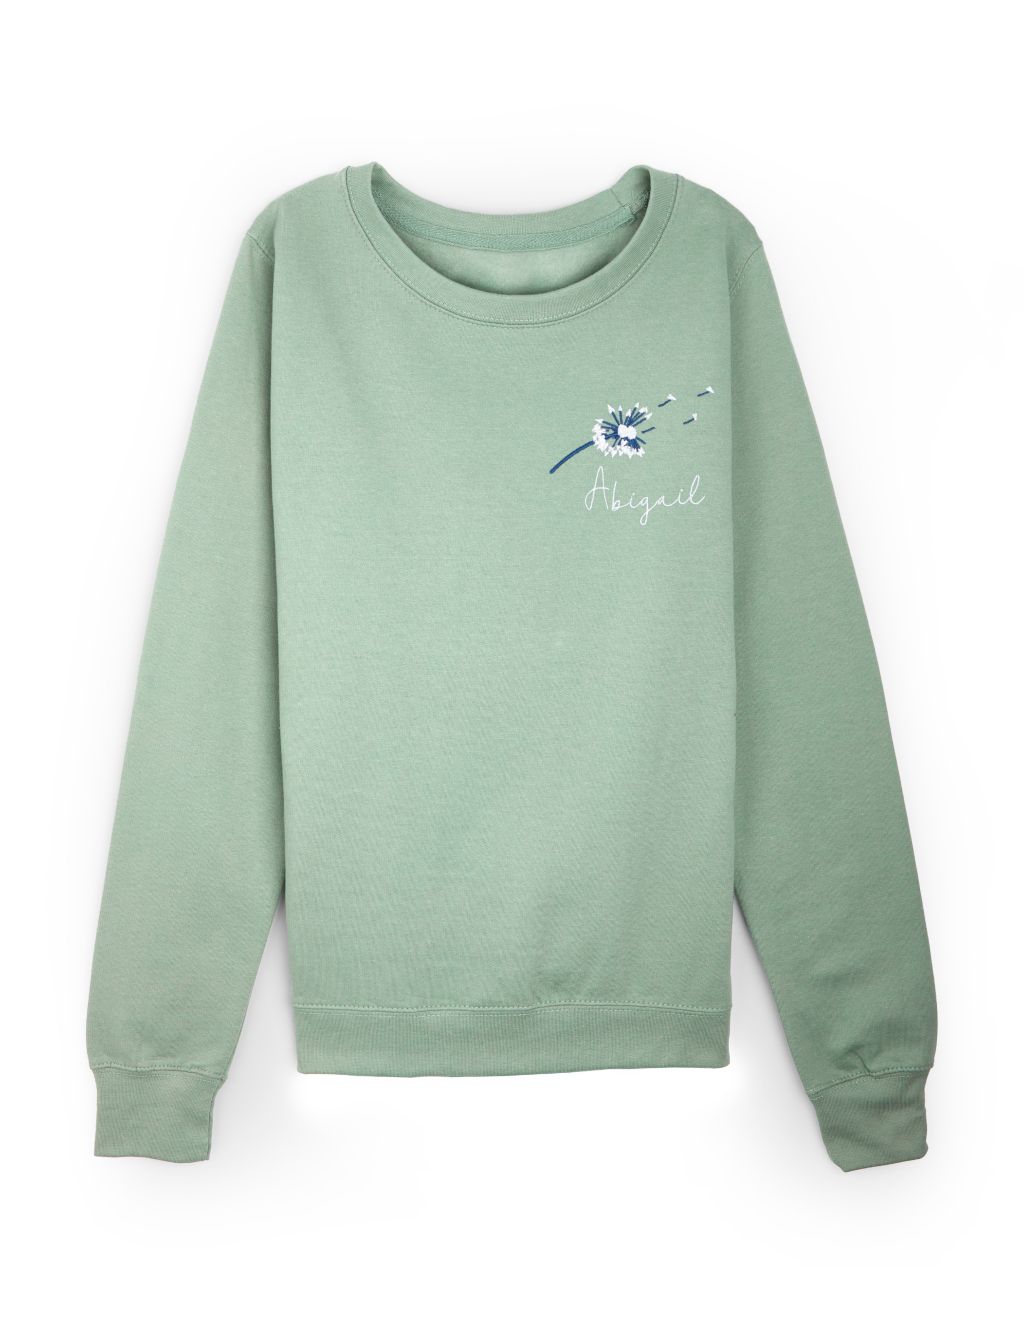 Women’s Green Sweatshirts Available at M&S